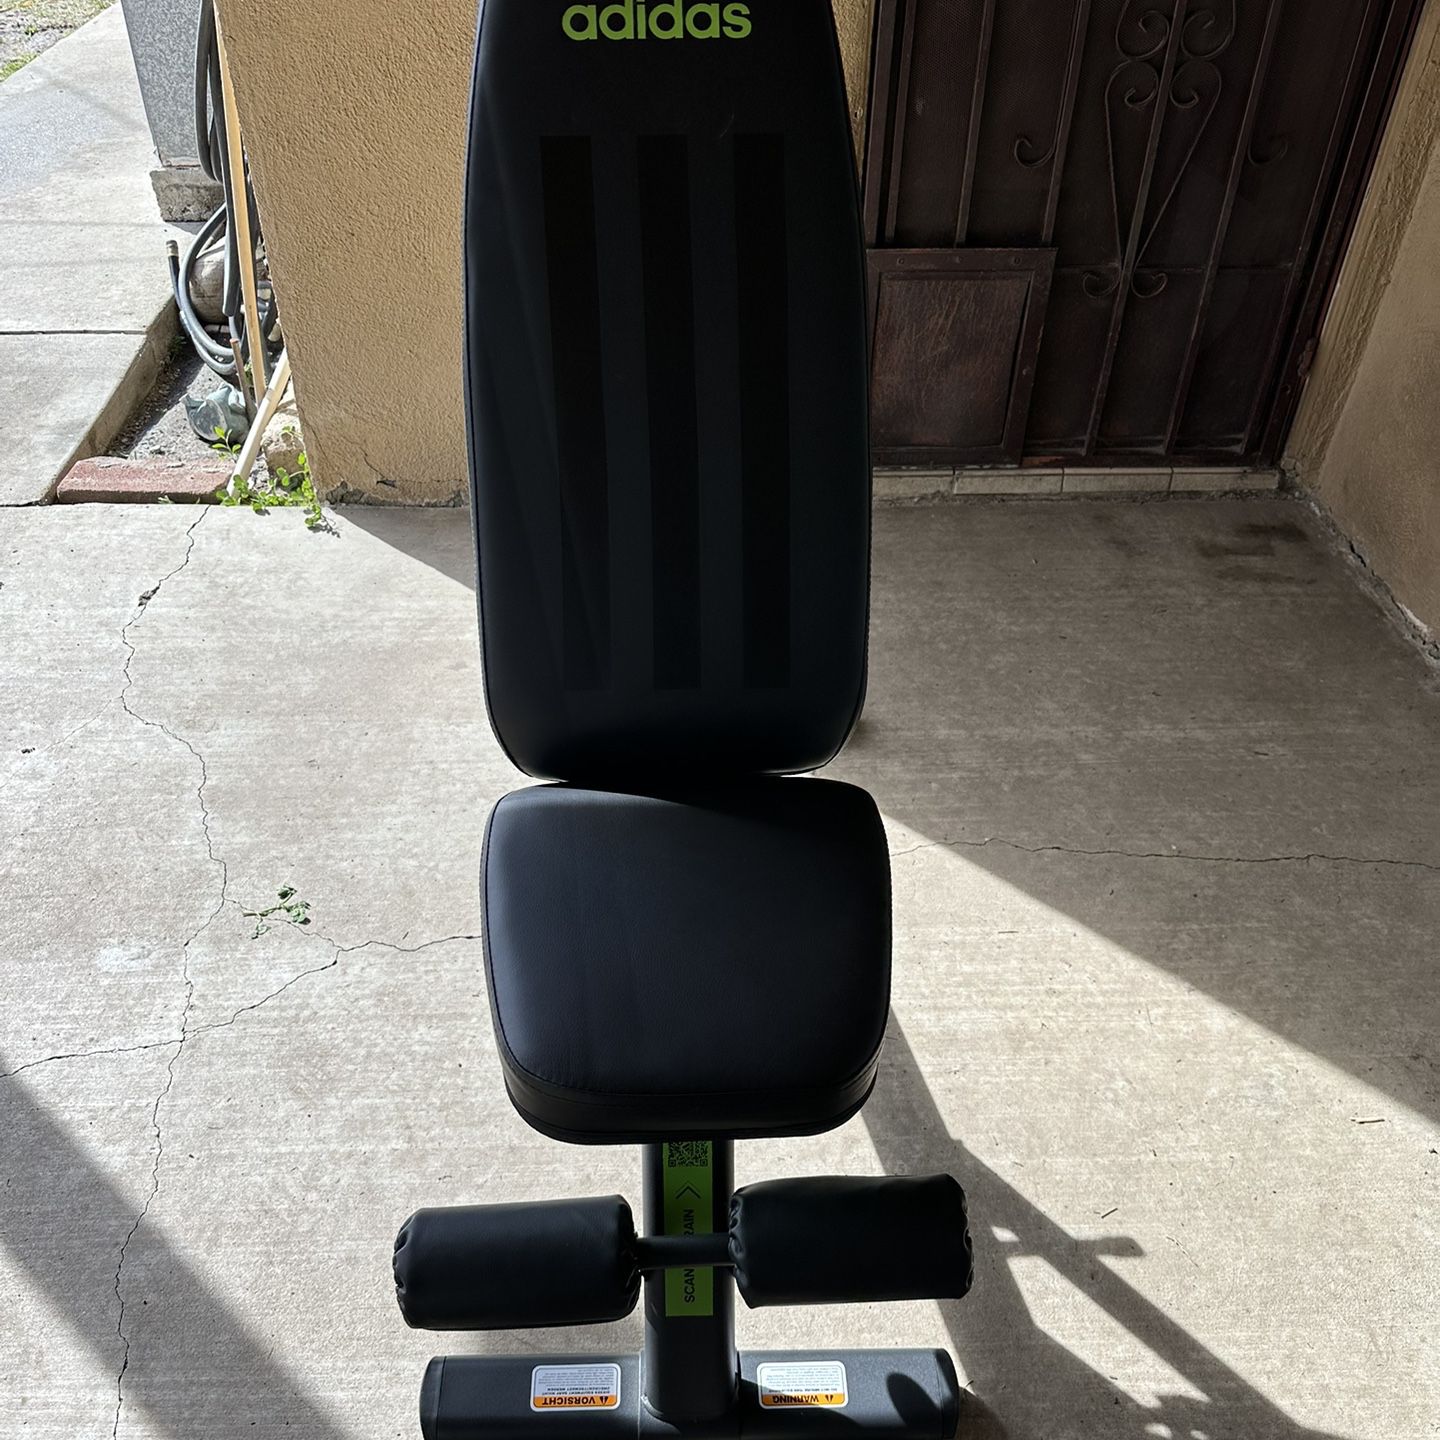 Adidas Performance Utility Bench for Hills, CA - OfferUp